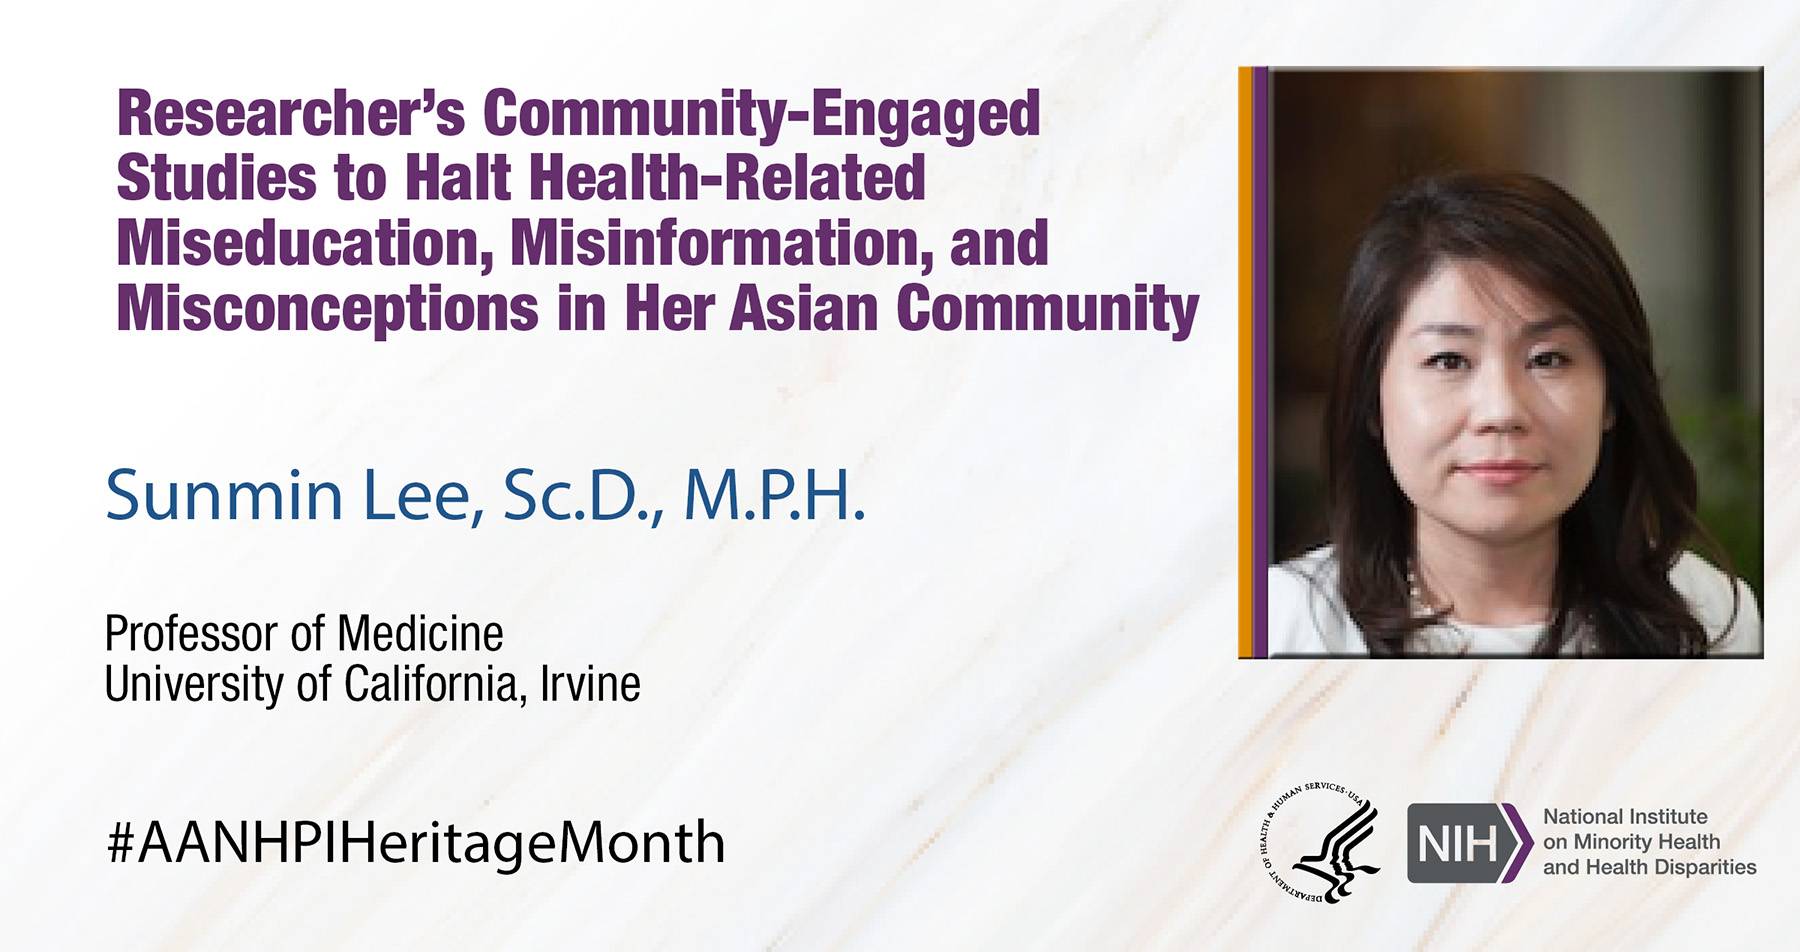 NIMHD's conversations with researchers pursuing health equity by working with communities for AANHPI Heritage Month: Dr. Sunmin Lee